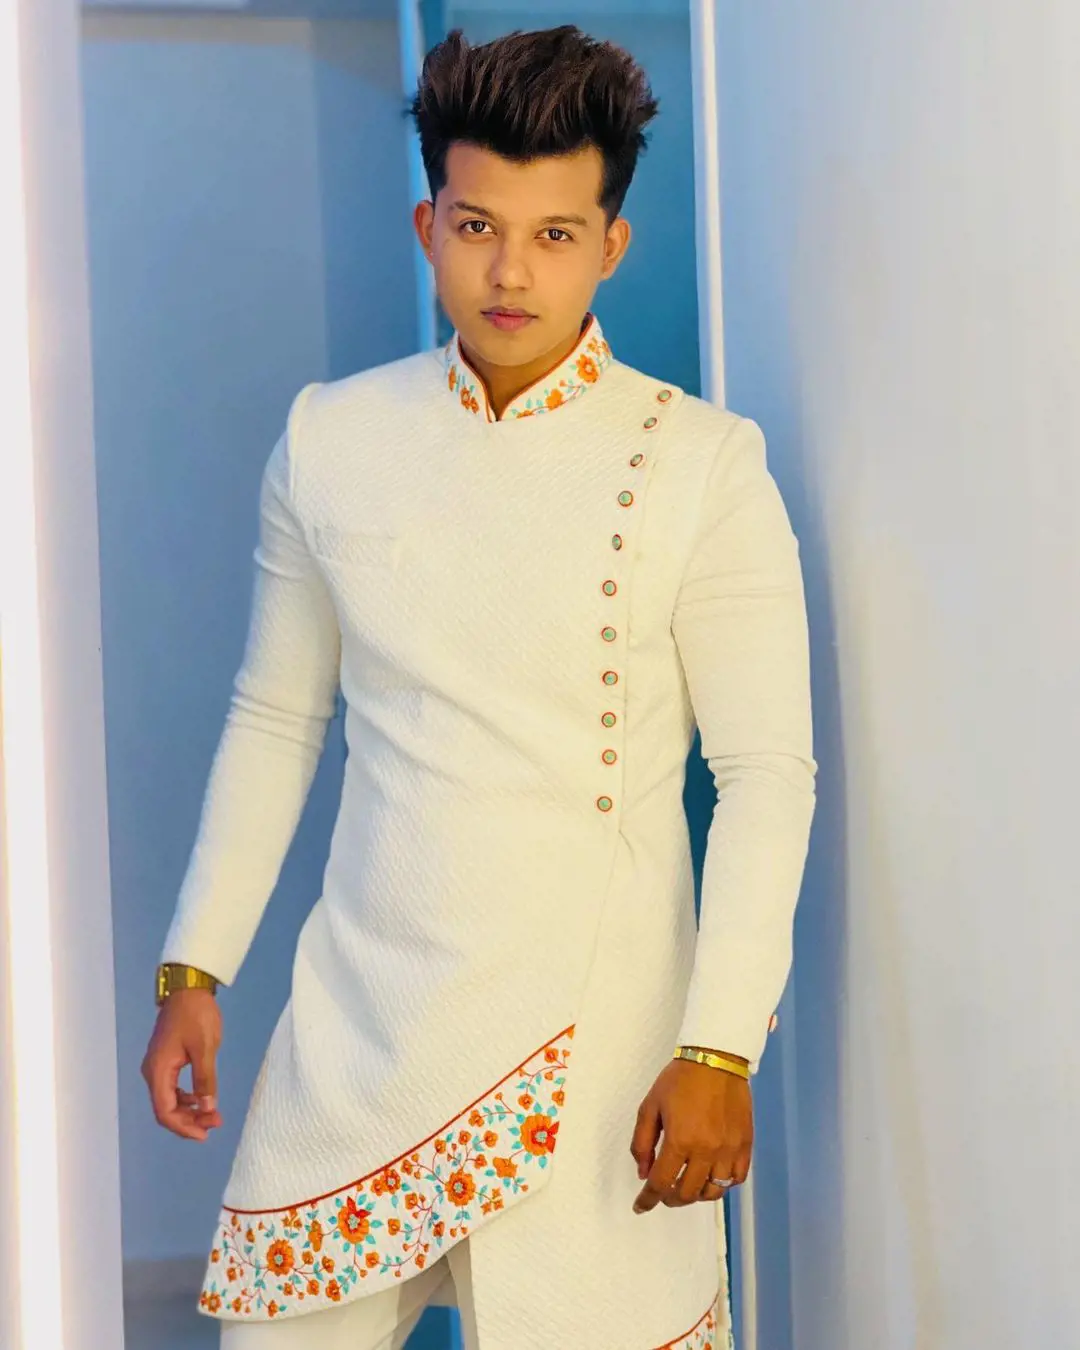 Riyaz sported a whiite sherwani on the auspicious ocassion of Diwali in October 2022.